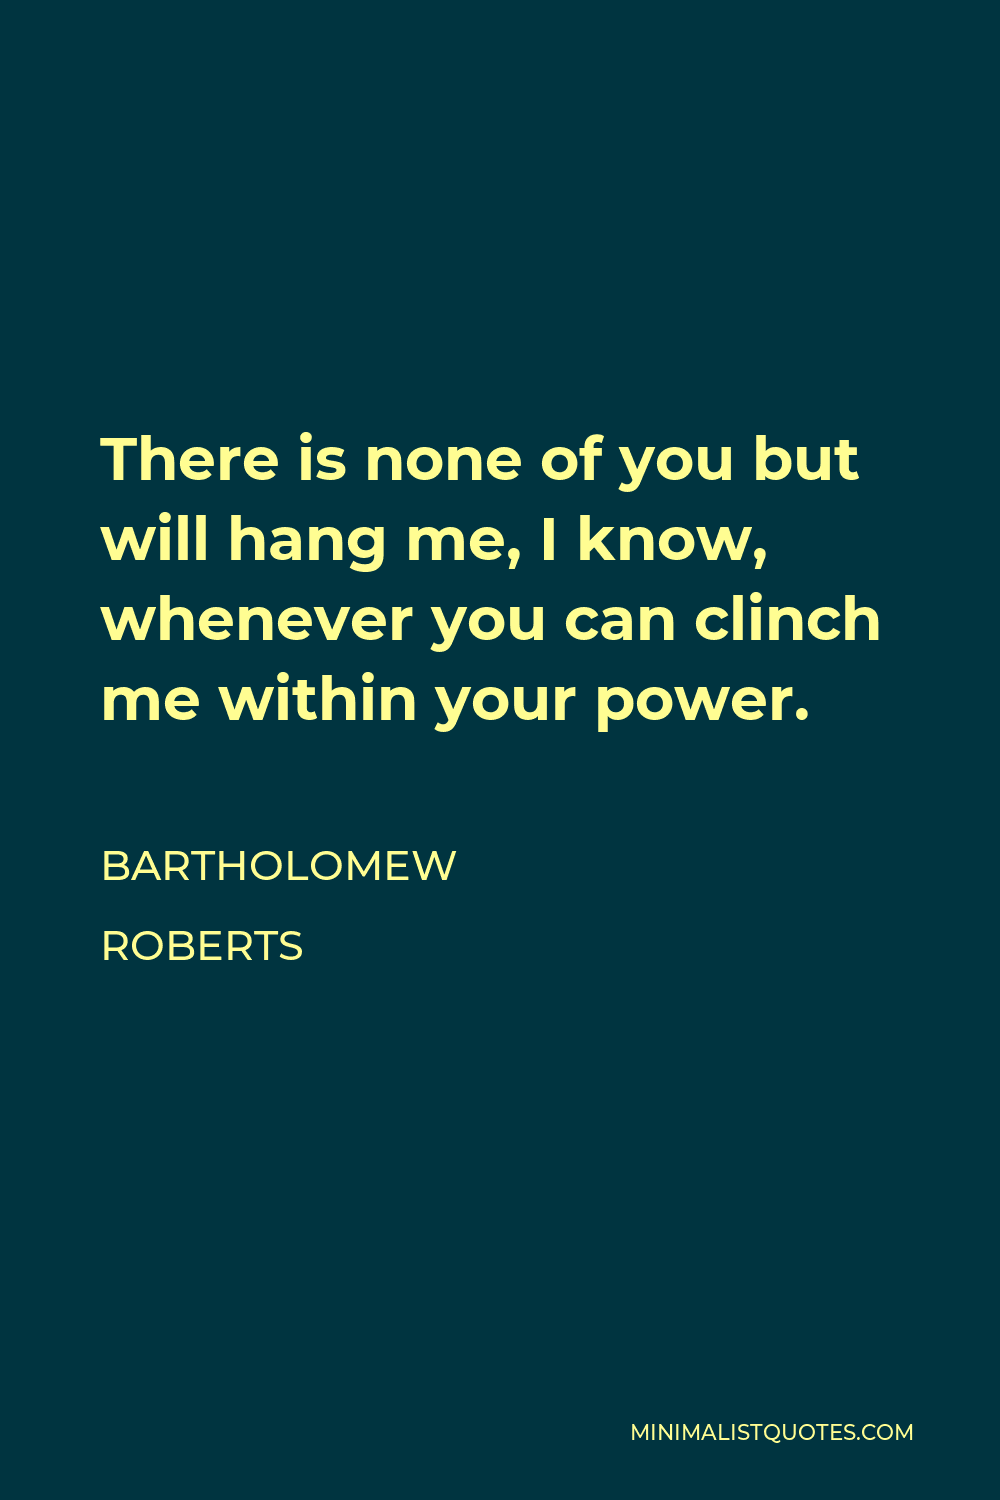 Bartholomew Roberts Quote - There is none of you but will hang me, I know, whenever you can clinch me within your power.